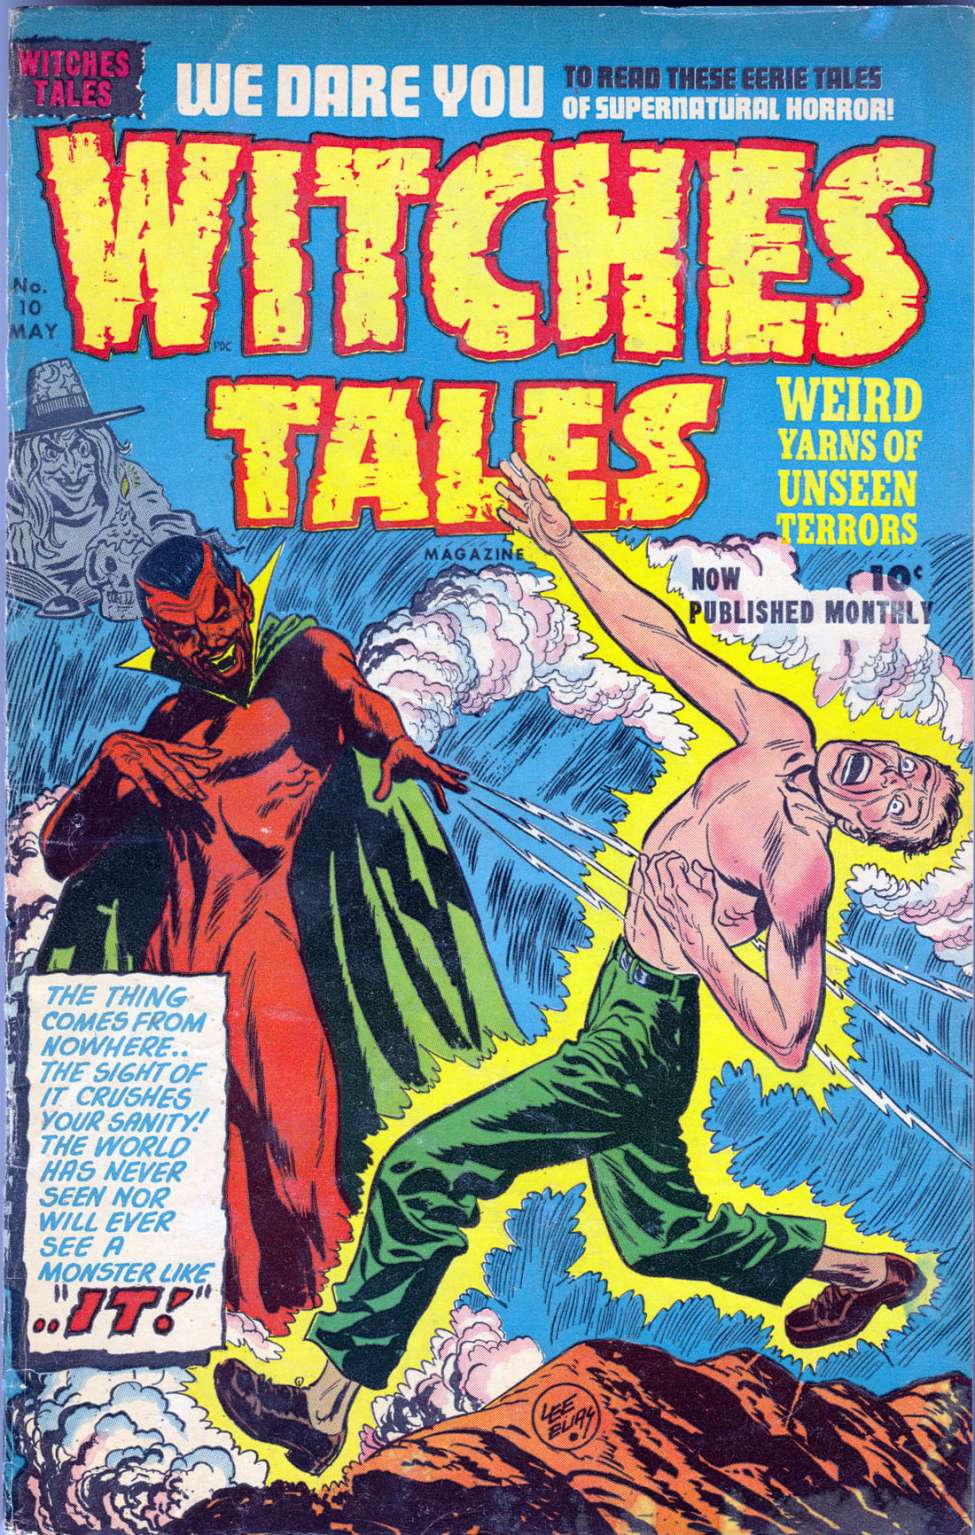 Comic Book Cover For Witches Tales 10 (alt) - Version 2